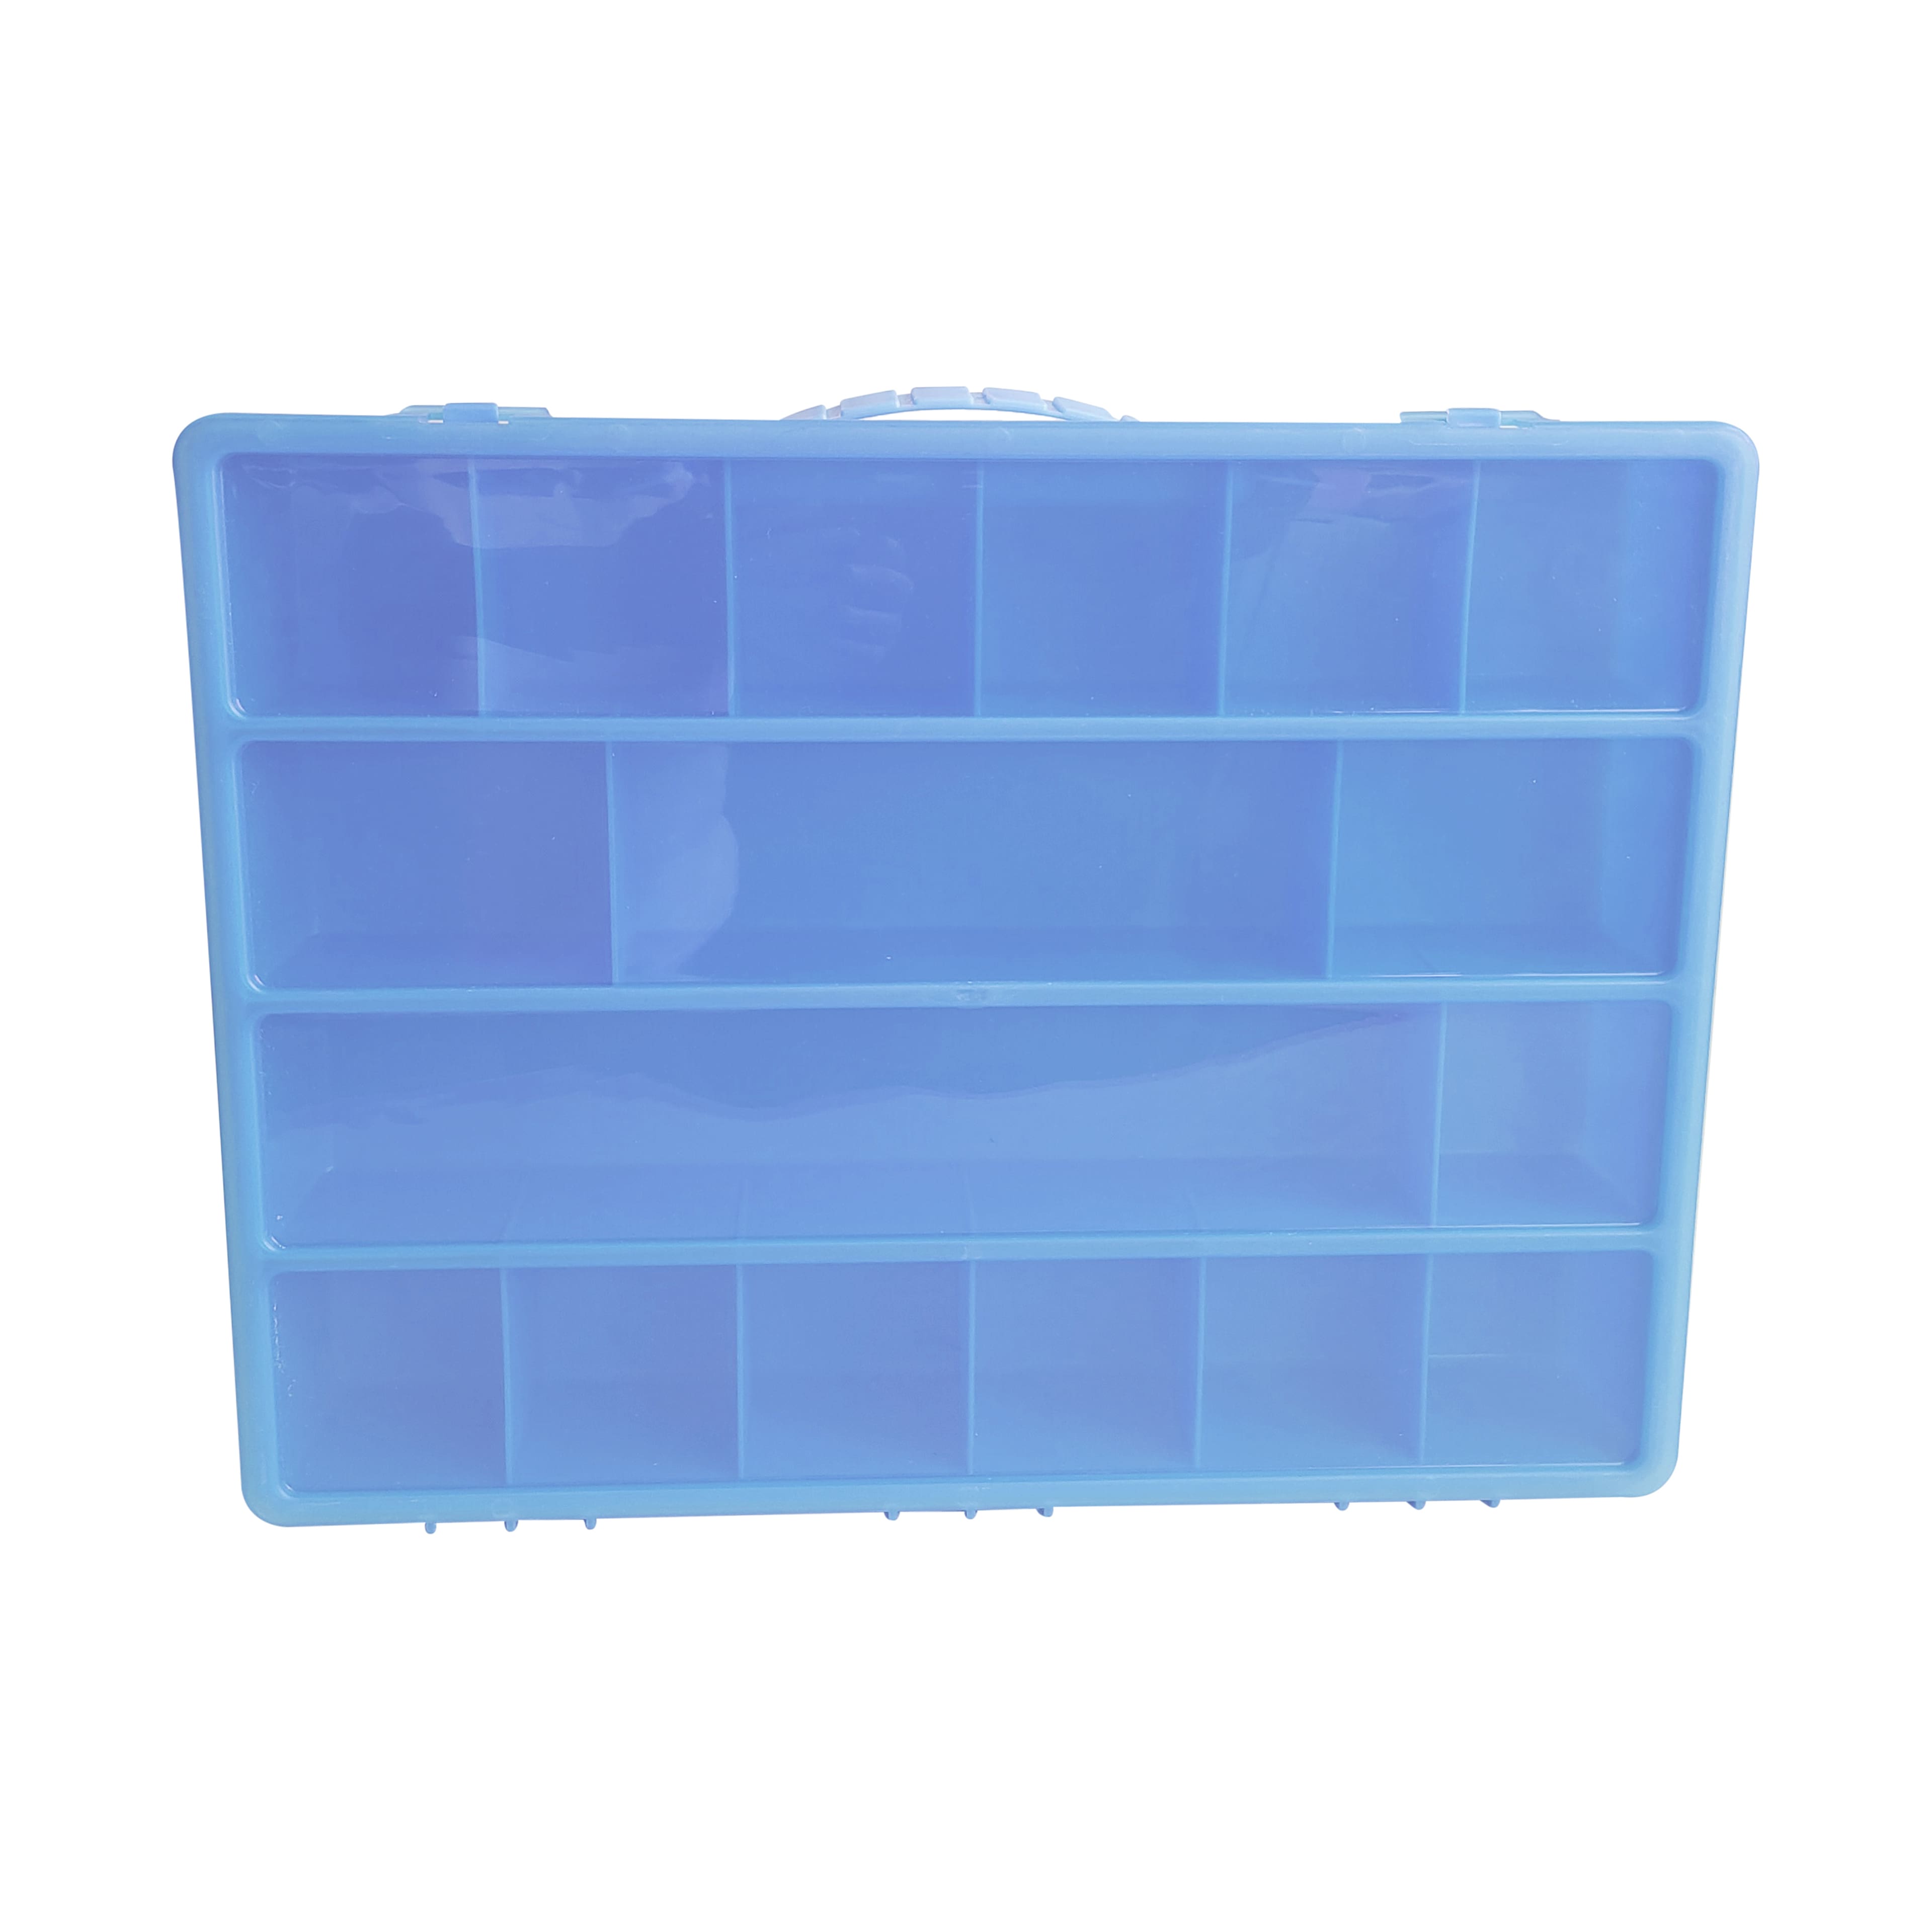 Storex Large Activity Tray, Kids' Craft and Bead Organizer, Blue, 12-Pack